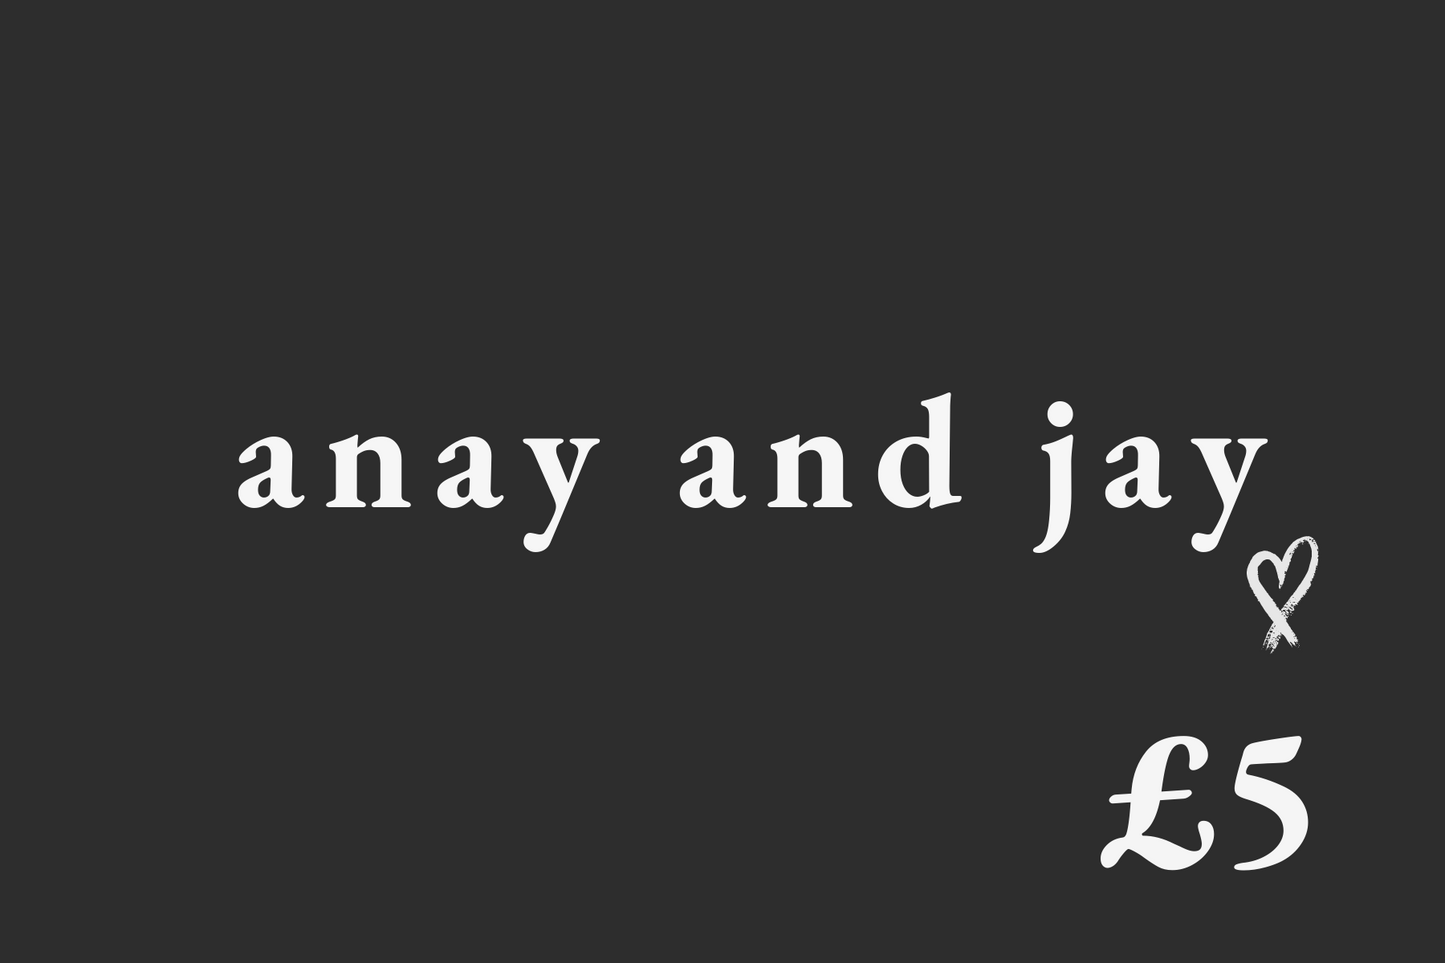 anay and jay gift voucher